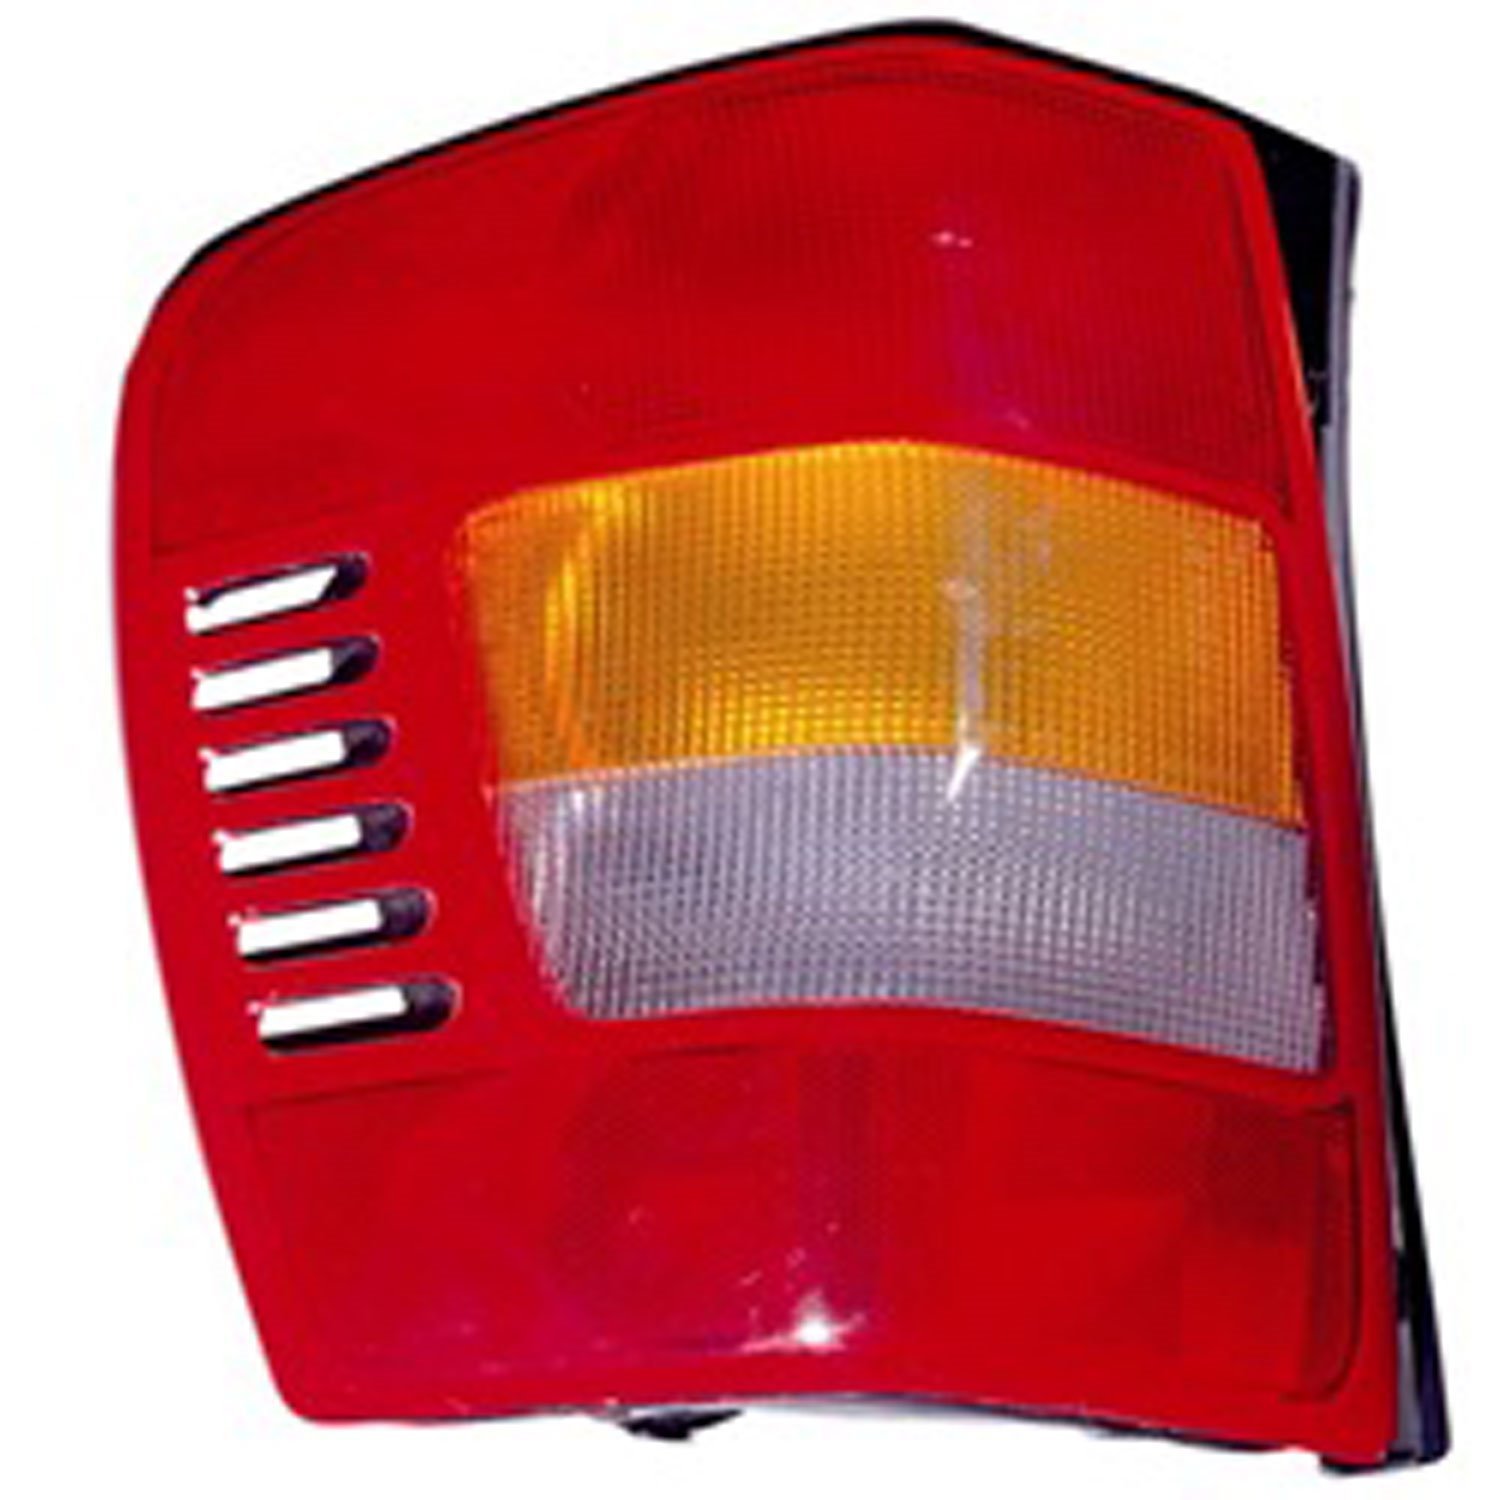 Replacement tail light assembly from Omix-ADA, Fits left side of 99-04 Jeep Grand Cherokee WJ